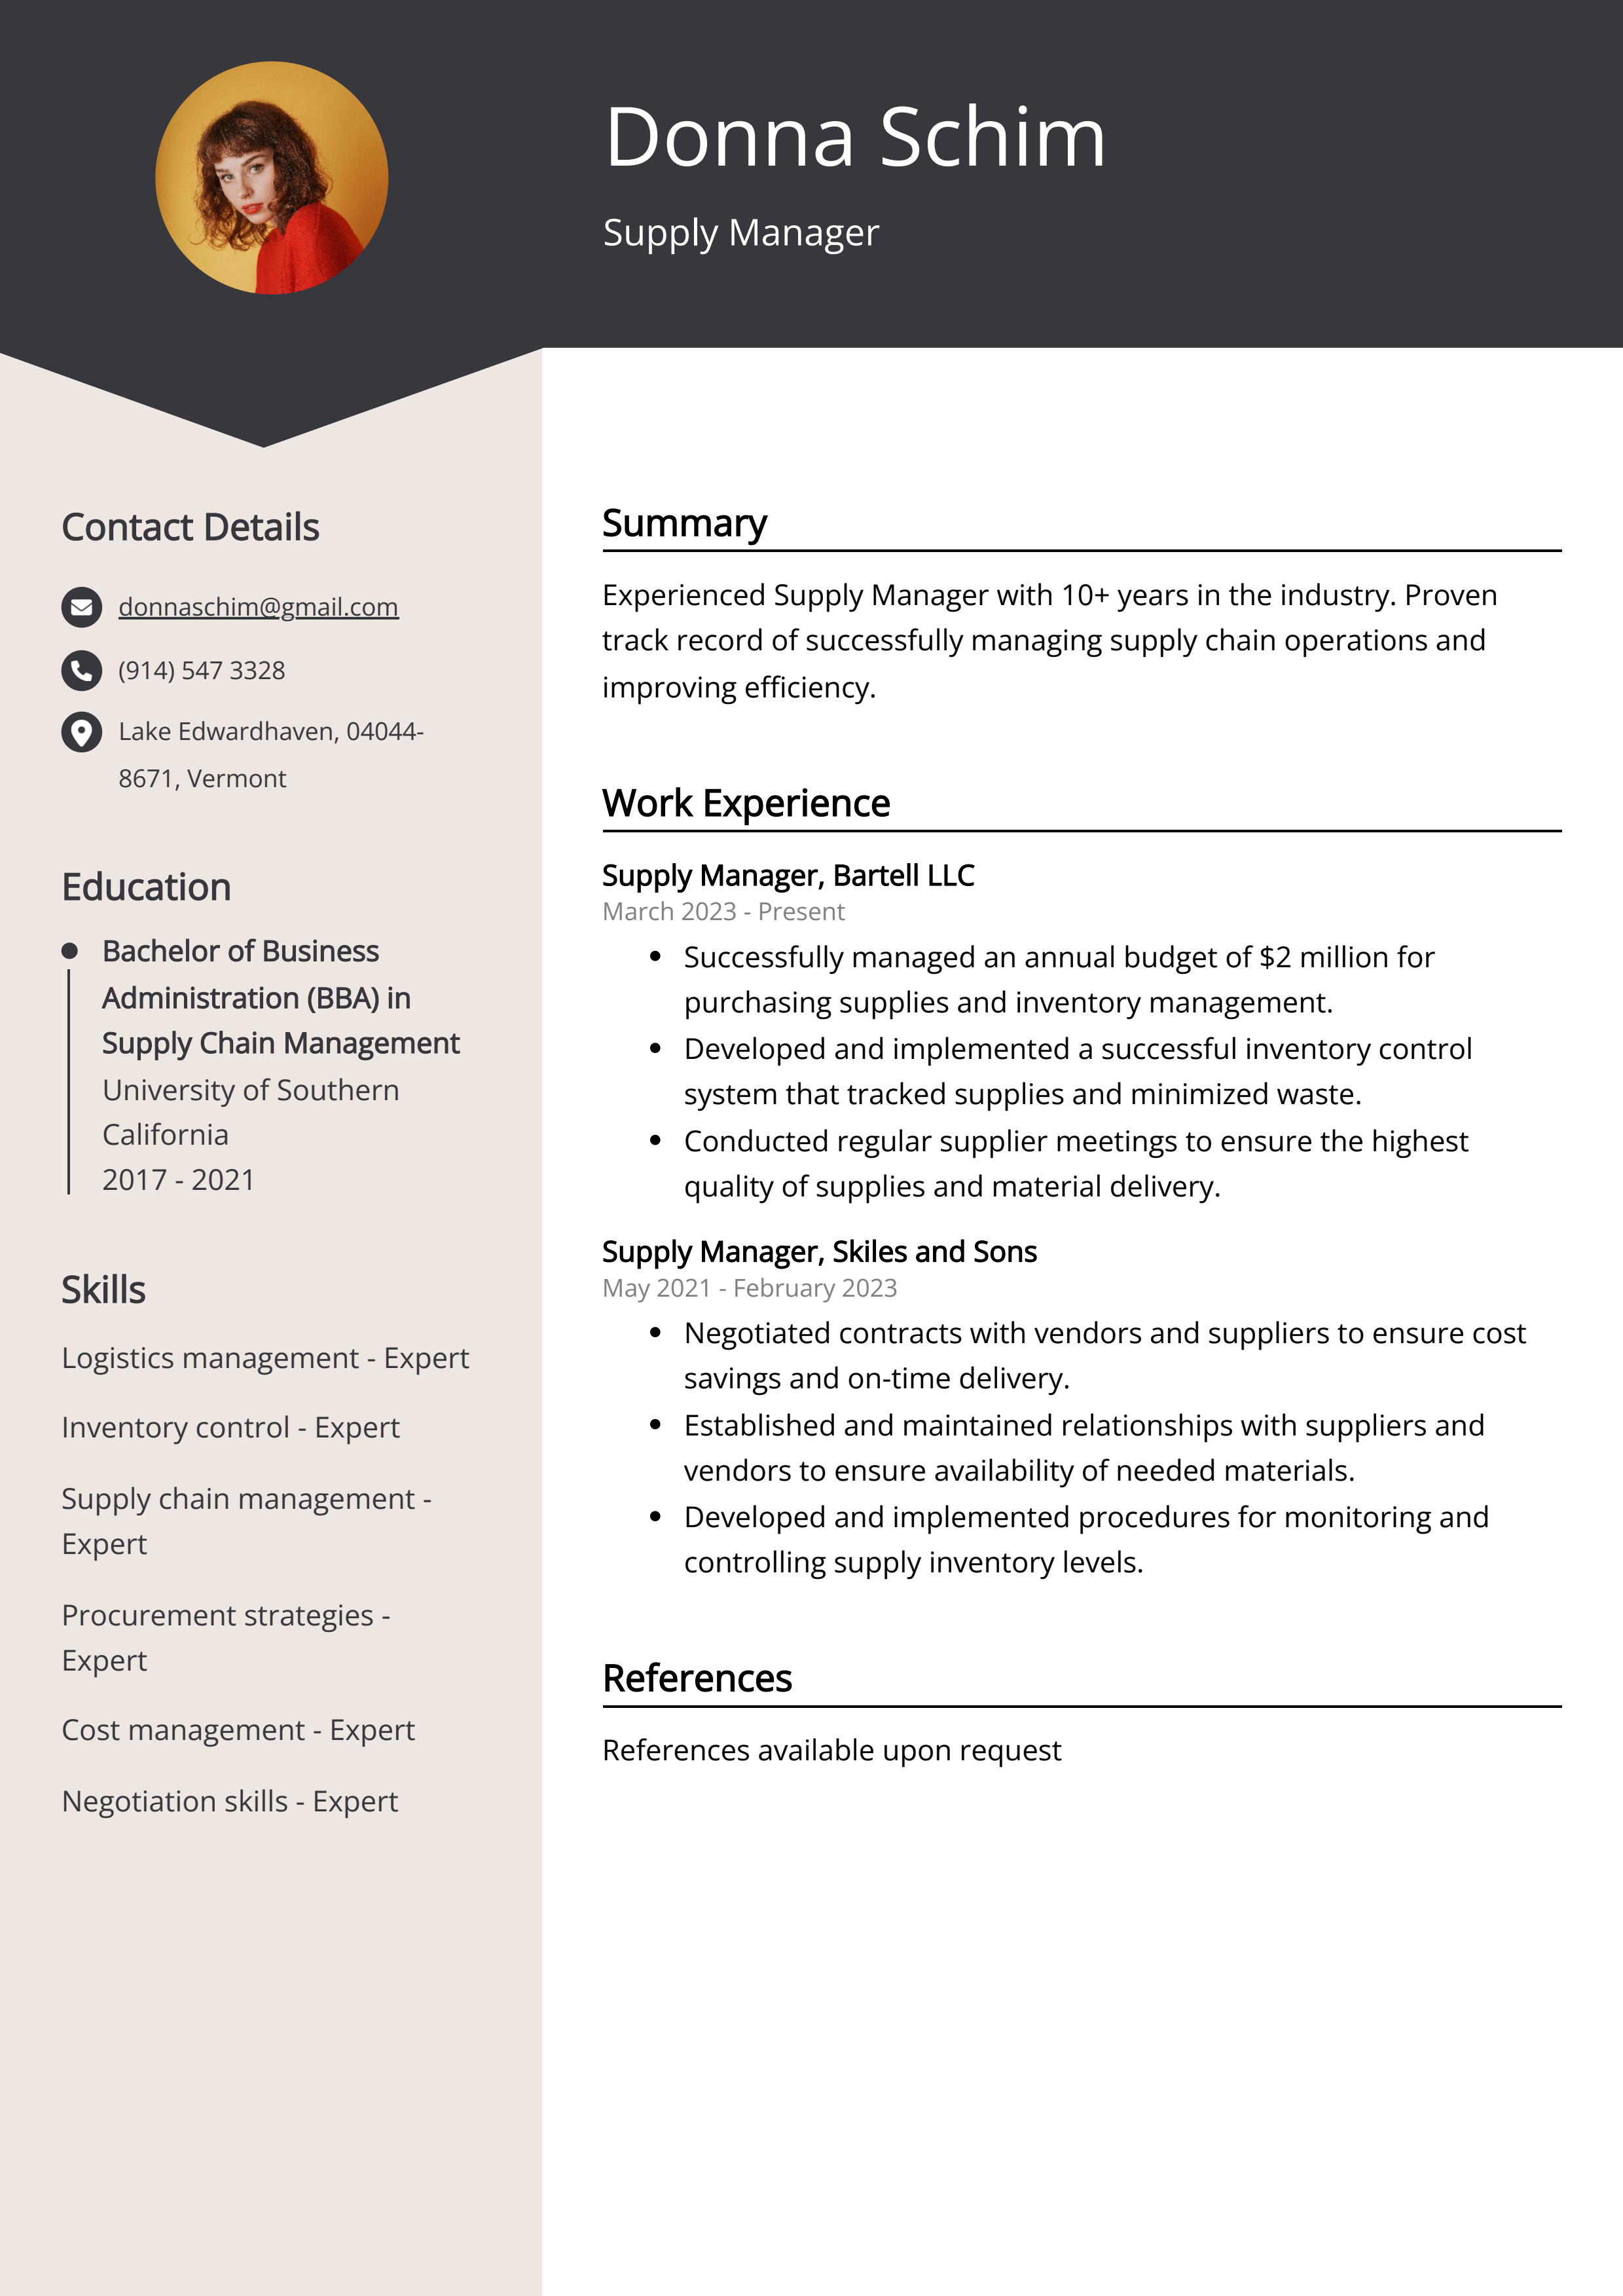 Supply Manager Resume Example